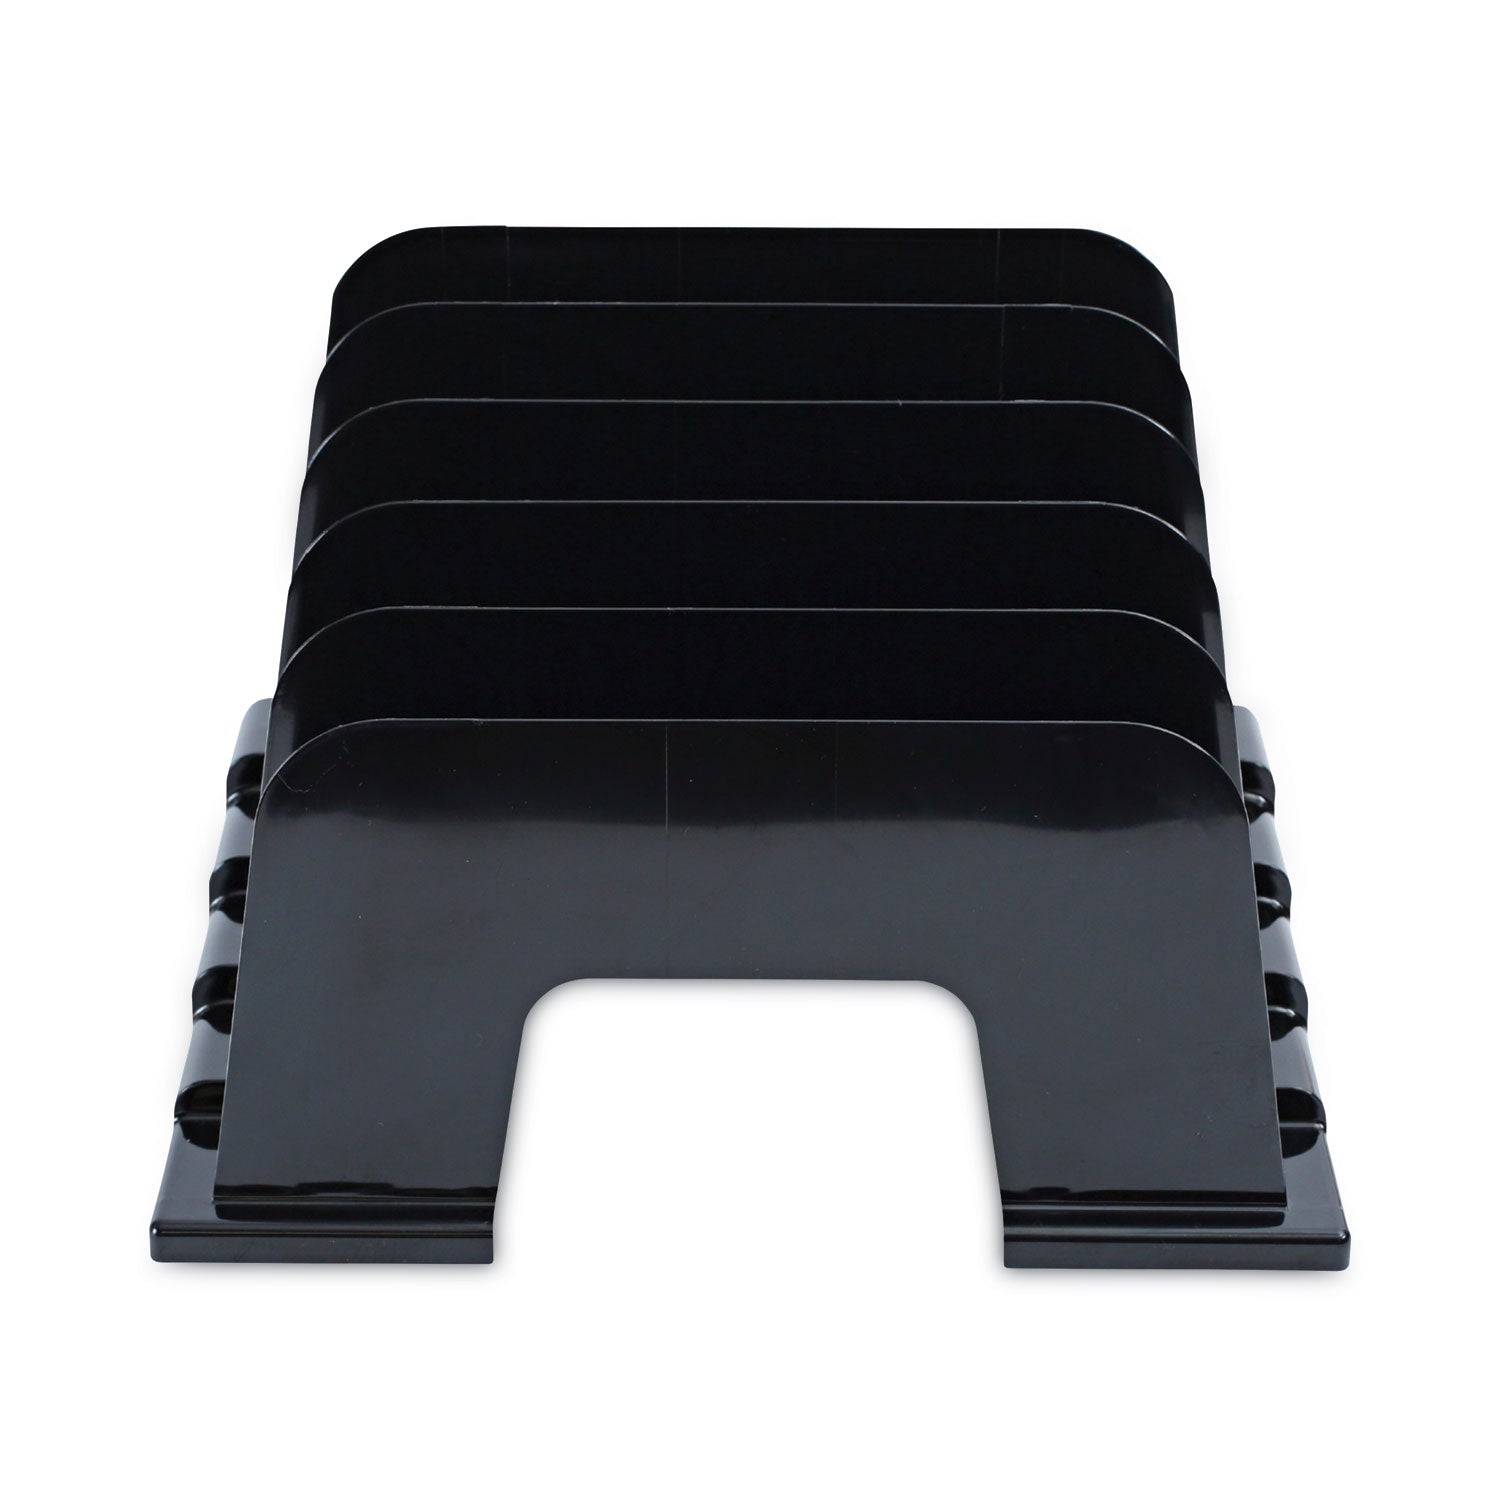 Recycled Plastic Incline Sorter, 5 Sections, Letter Size Files, 13.25" x 9" x 9", Black - 